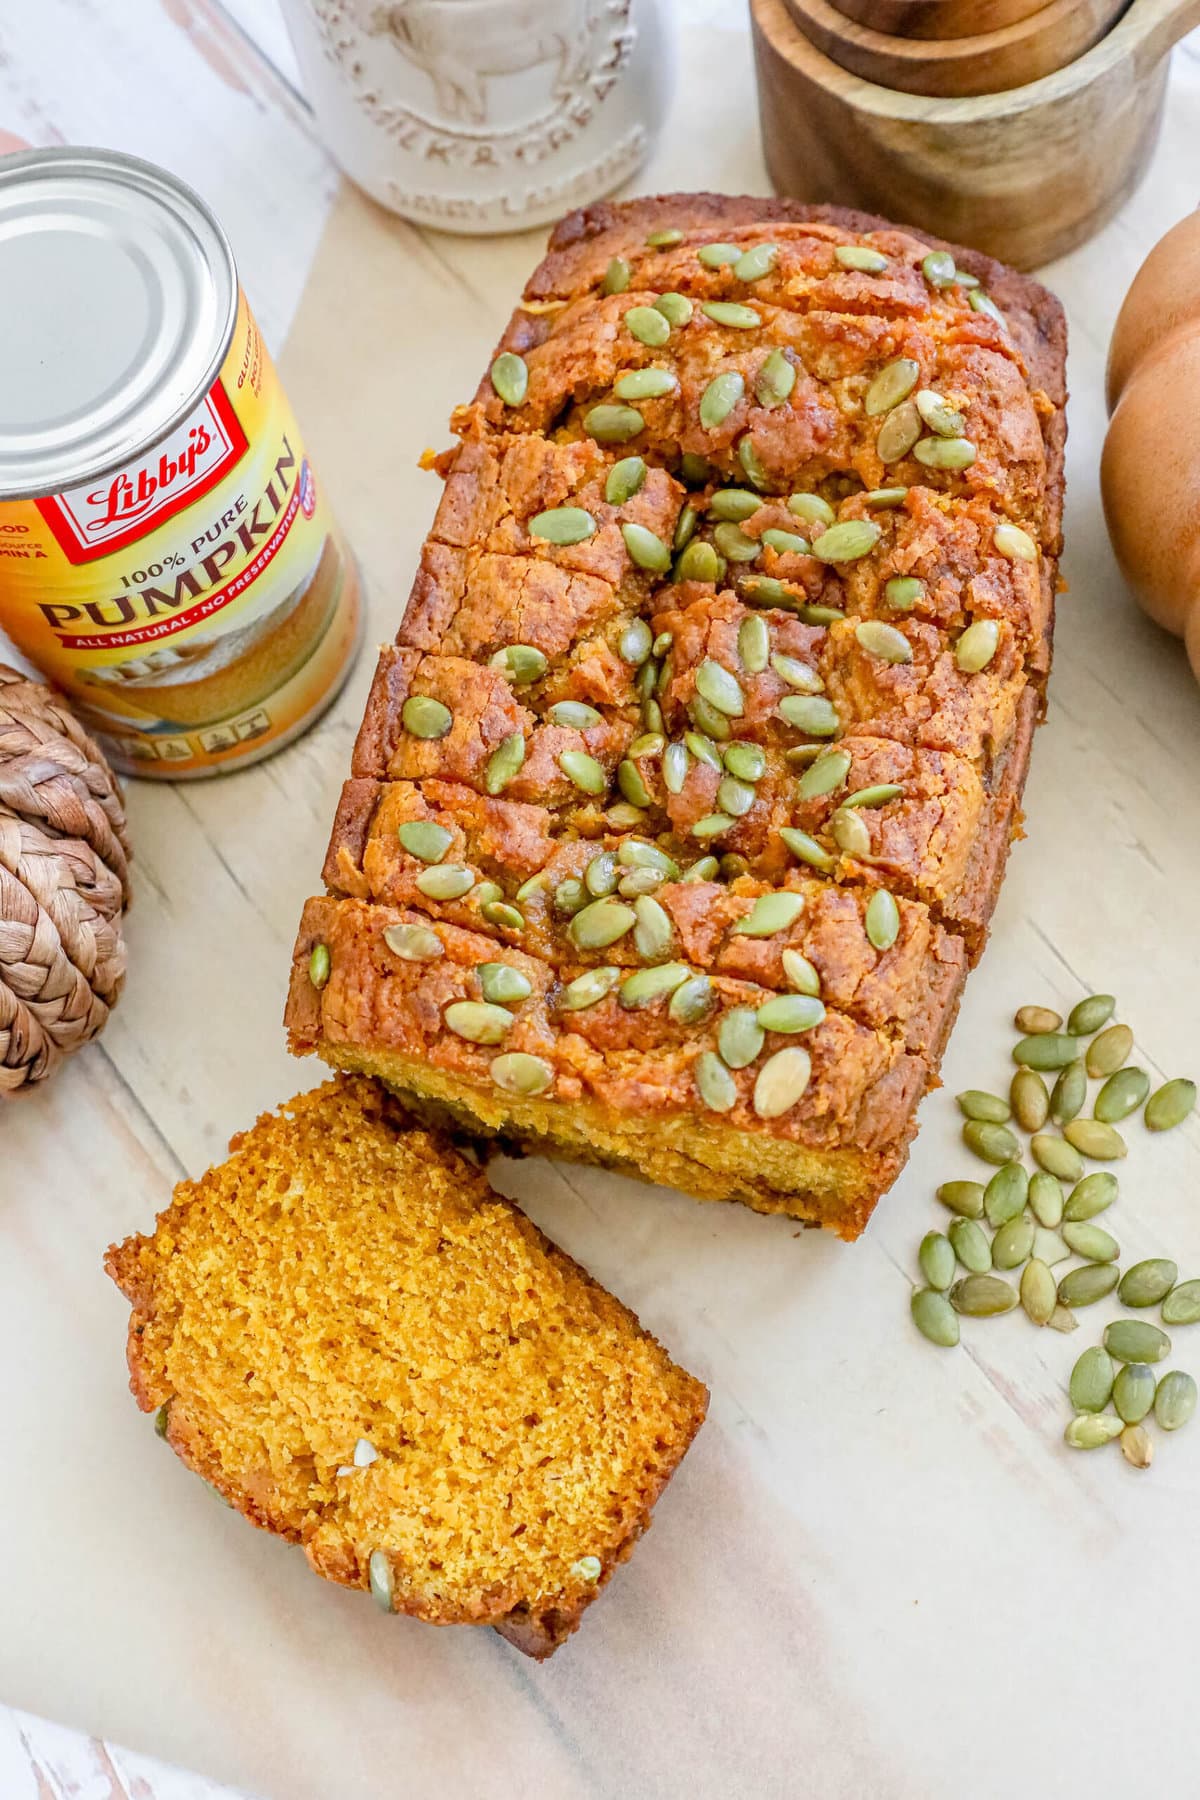 pumpkin bread with pumpkin seeds baked onto the top sliced on a table